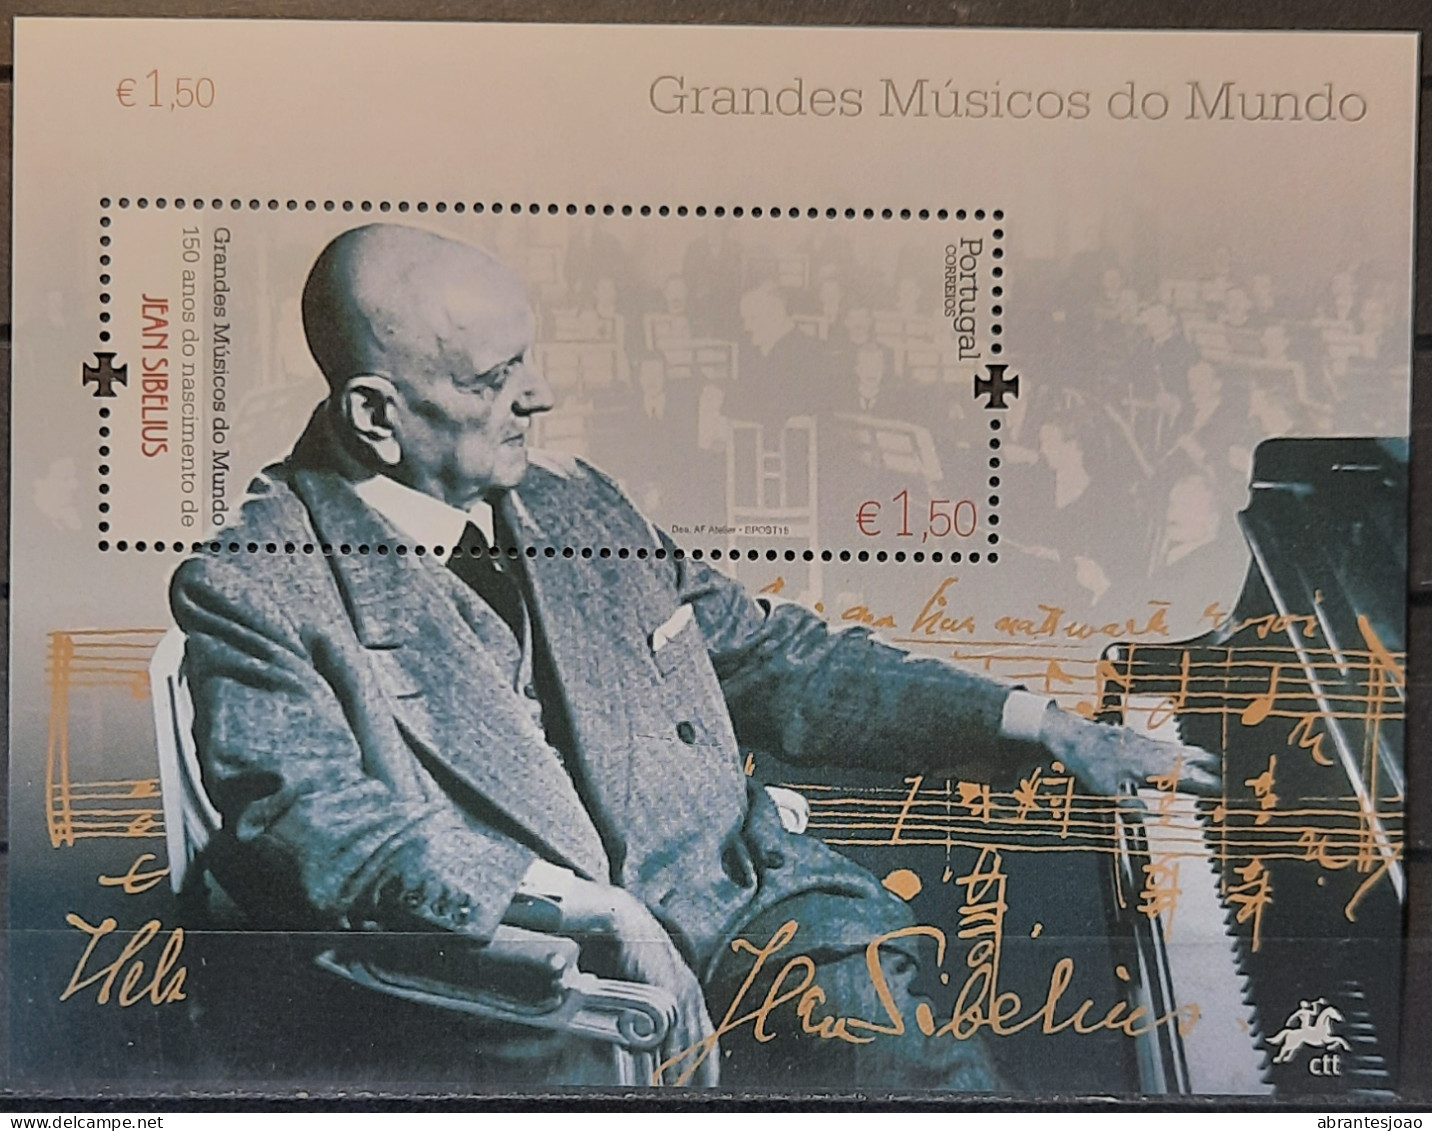 2015 - Portugal - MNH - Great Musicians Of The World - Jean Sibelius - 1 Stamp + Souvenir Sheet Of 1 Stamp - Ungebraucht